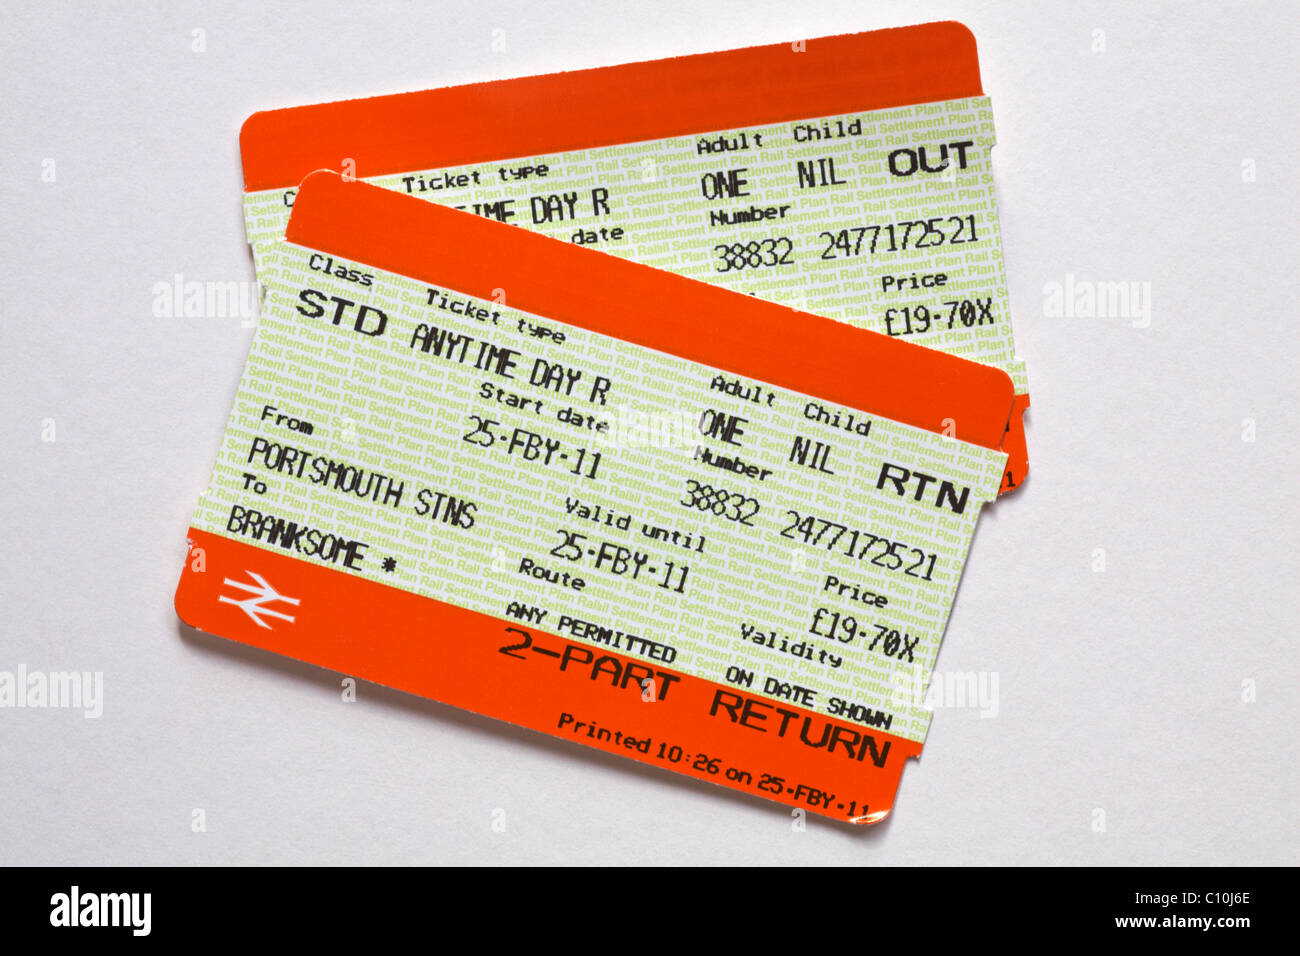 2-part return tickets between Branksome and Portsmouth stations on South West railways isolated on white background Stock Photo